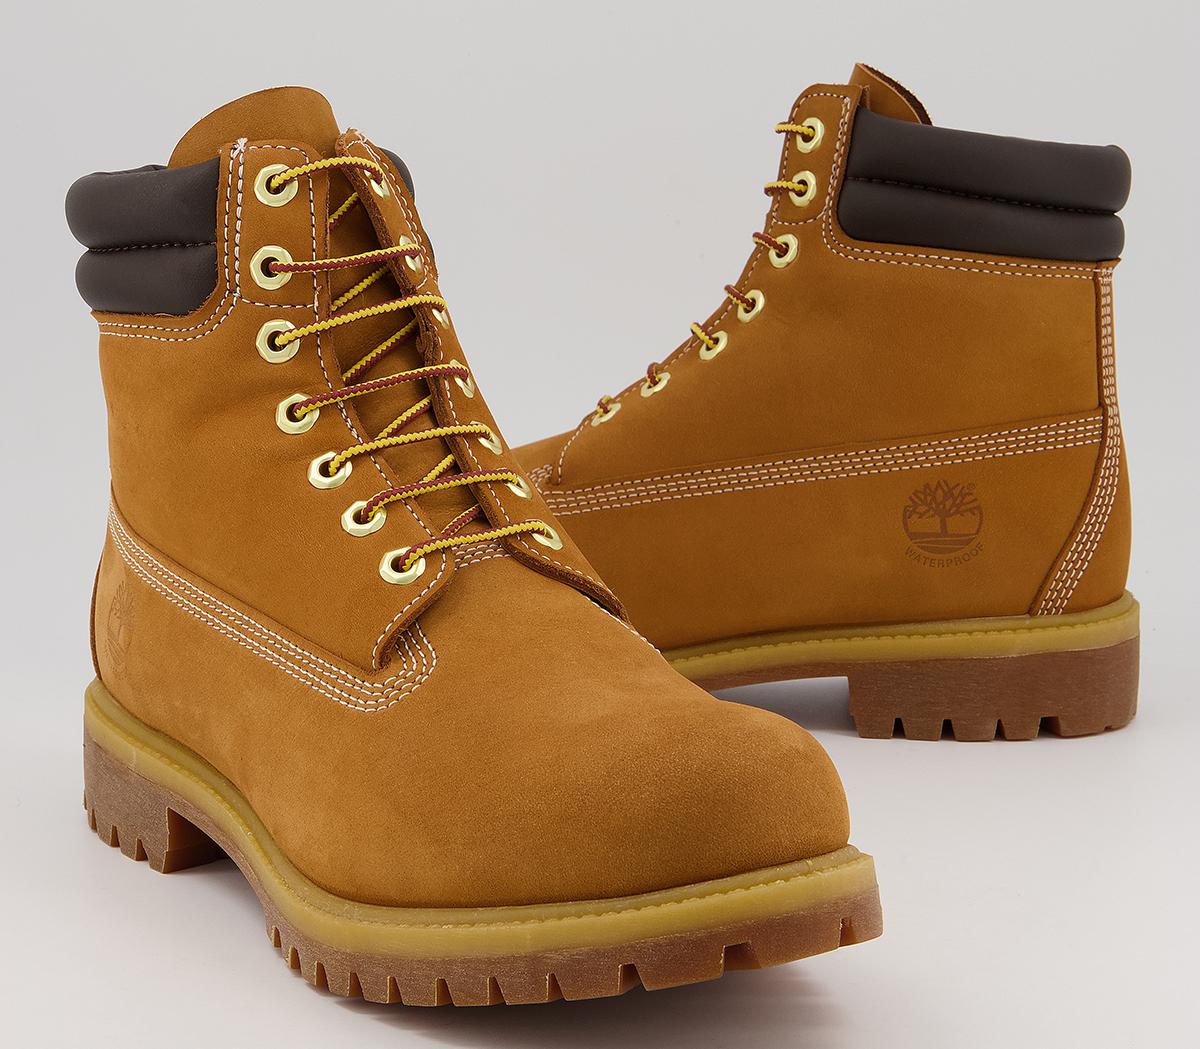 Timberland 6 Inch Double Collar Boots Wheat Nubuck - Men’s Boots